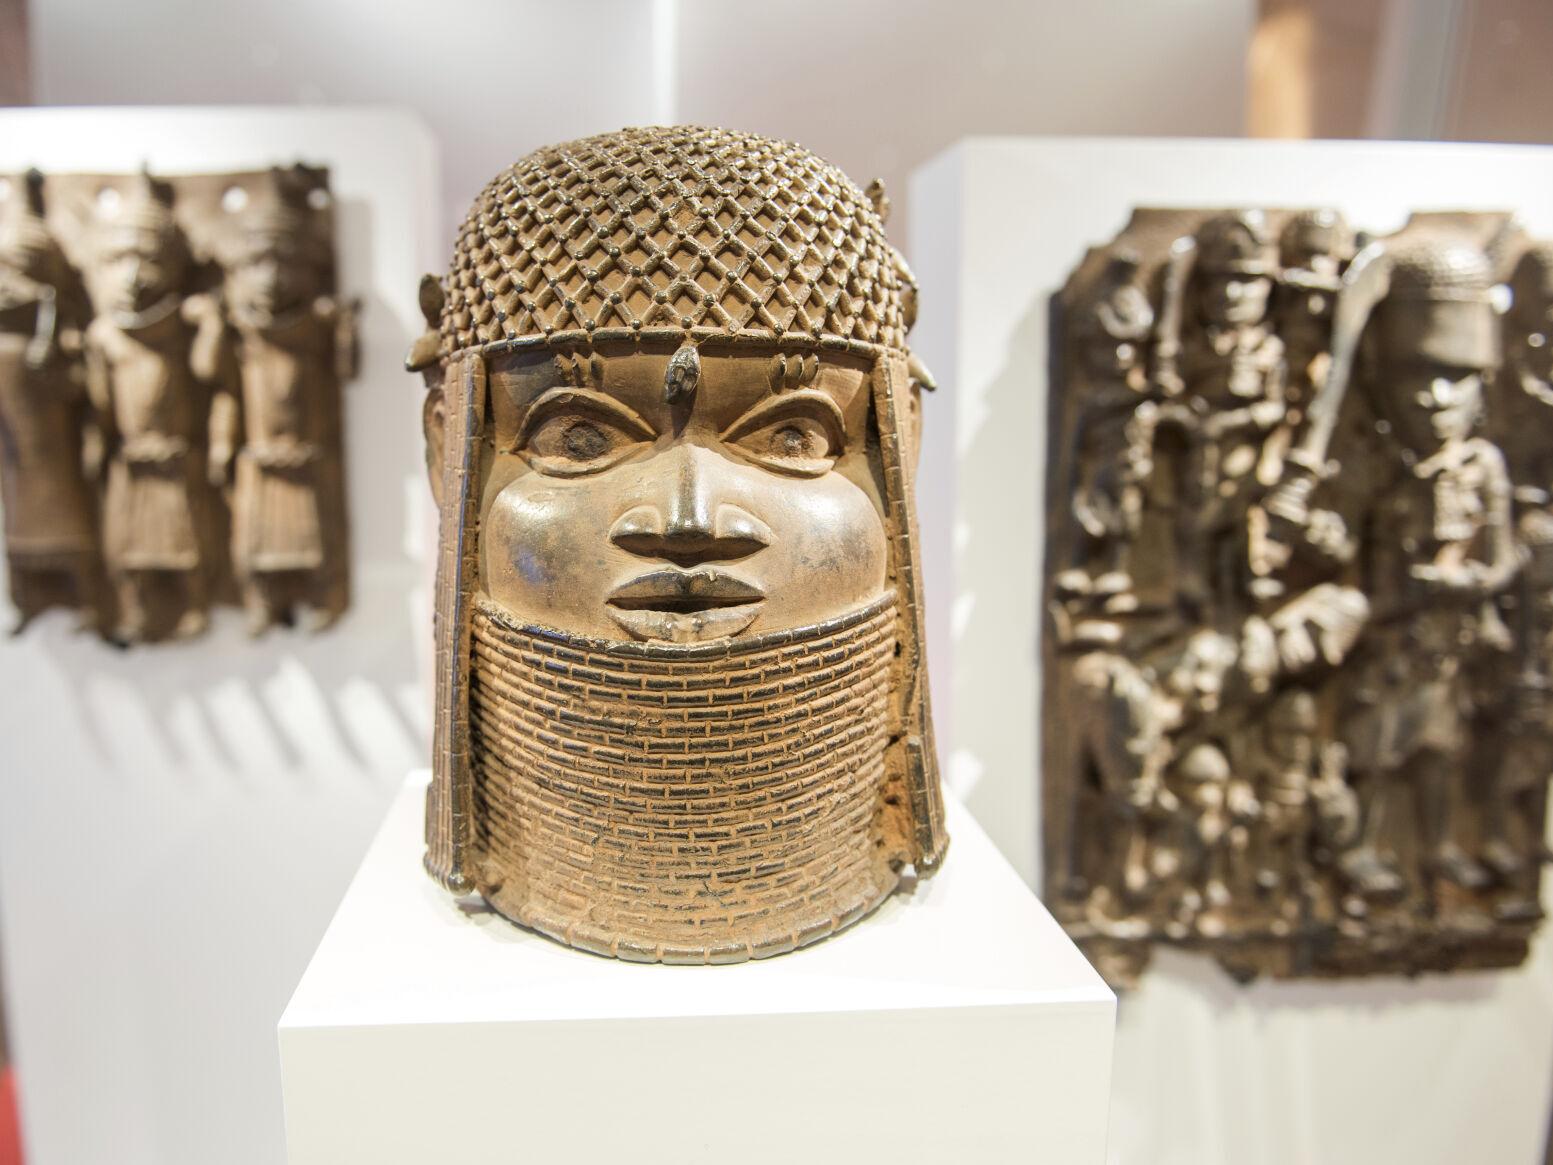 Germany Set To Return Benin Bronzes 125 Years After